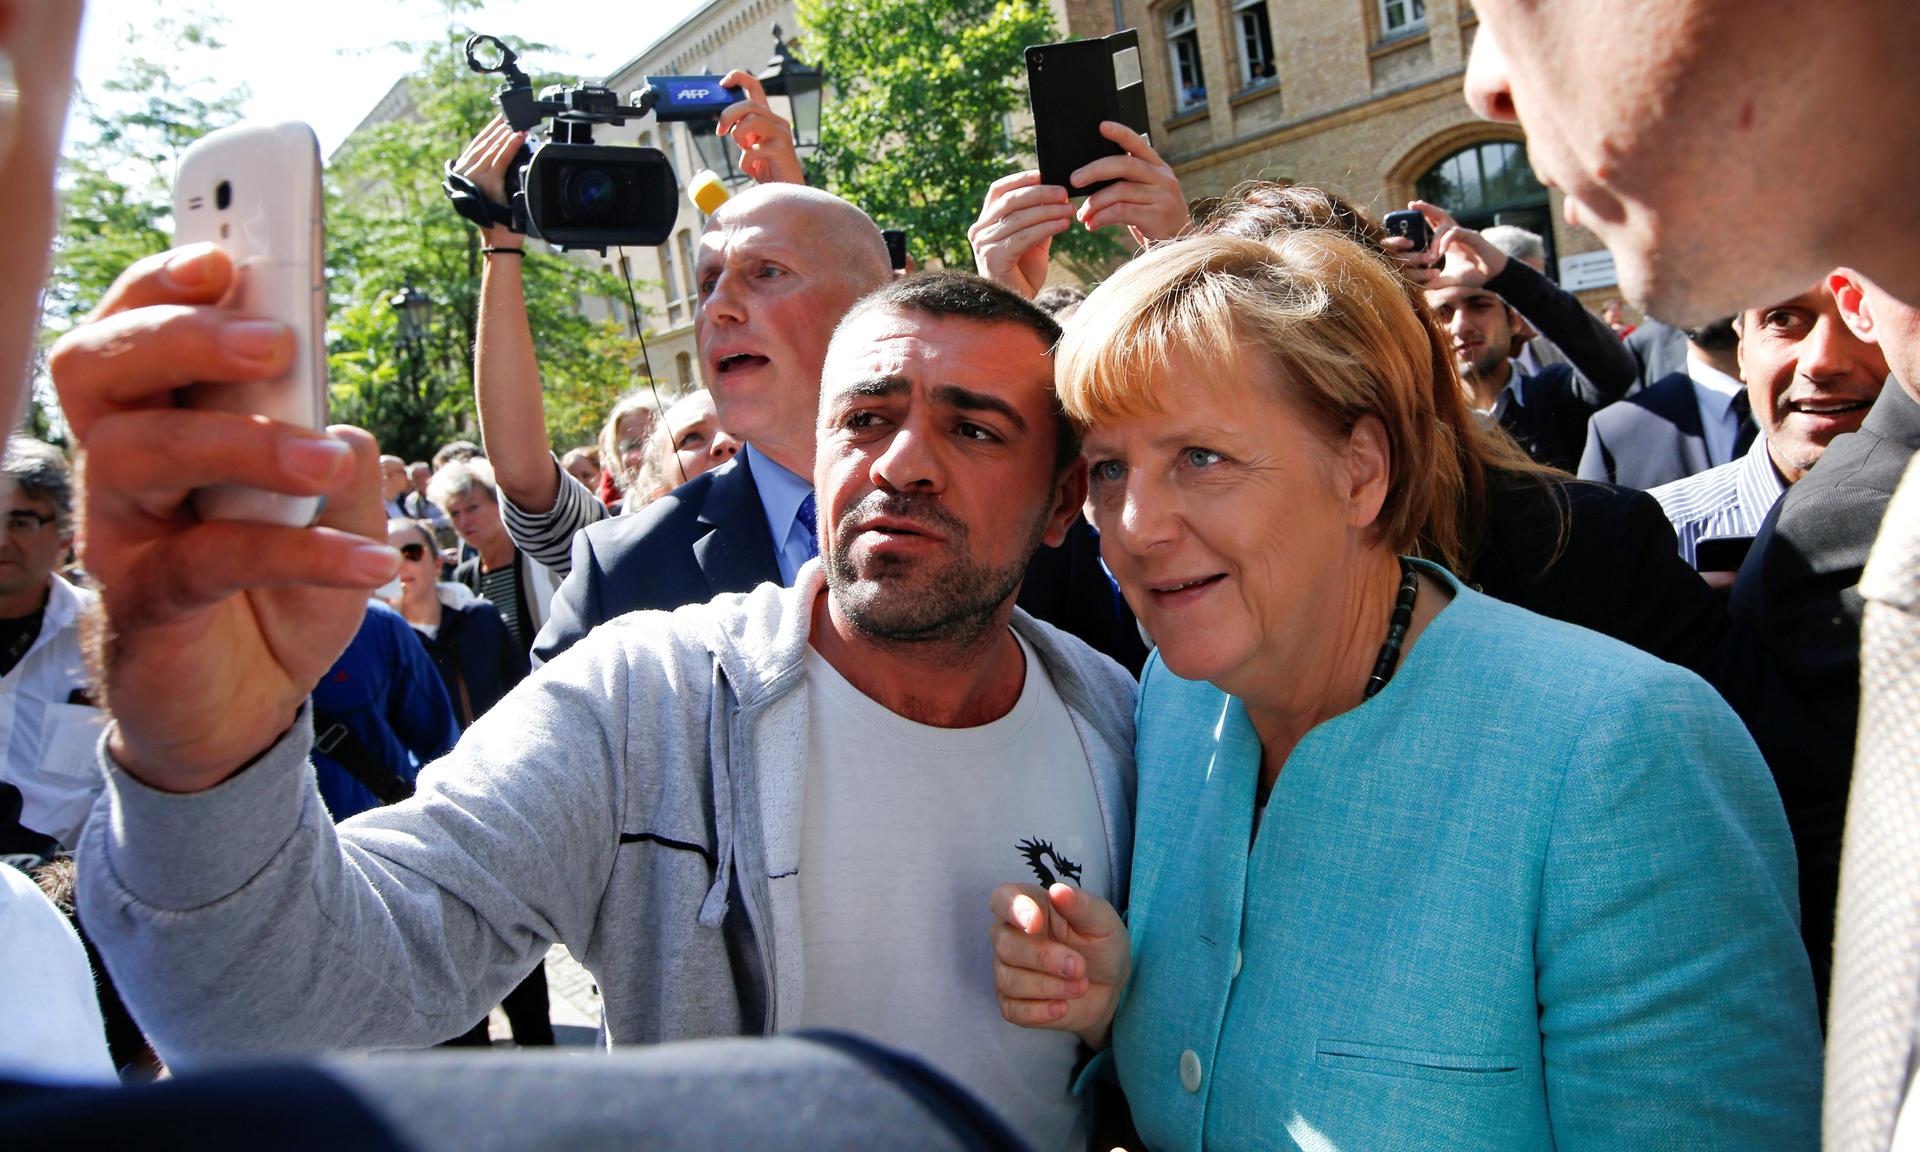 A man who identifies himself as a migrant takes a selfie with German Chancellor Angela Merkel outside a refugee camp near the Federal Office for Migration and Refugees in Berlin, Germany, Sept. 10, 2015.